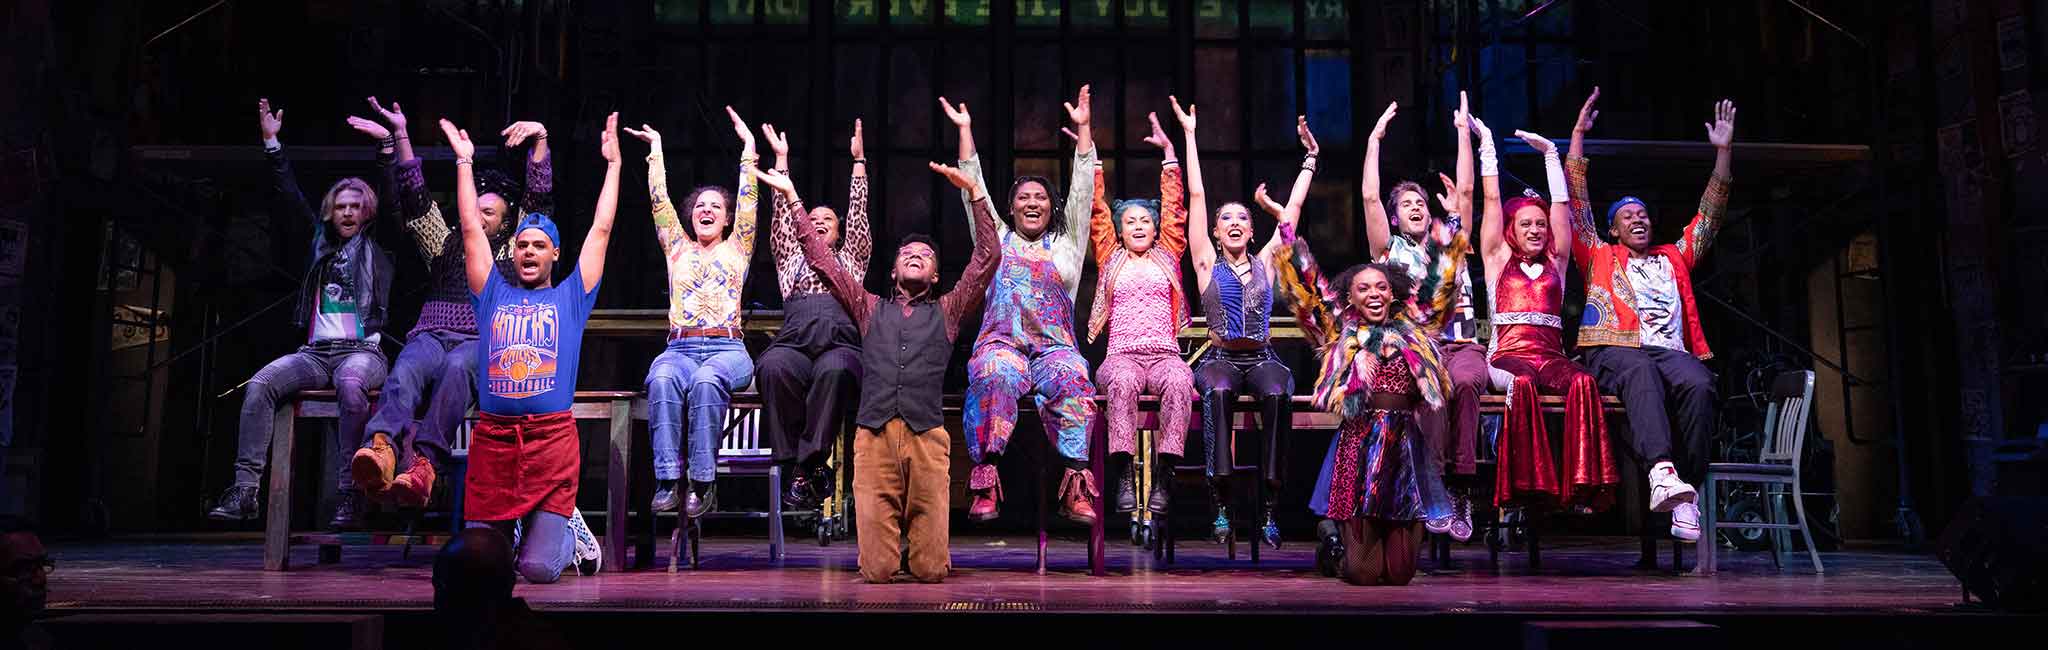 The cast of Rent with their hands in the air singing.